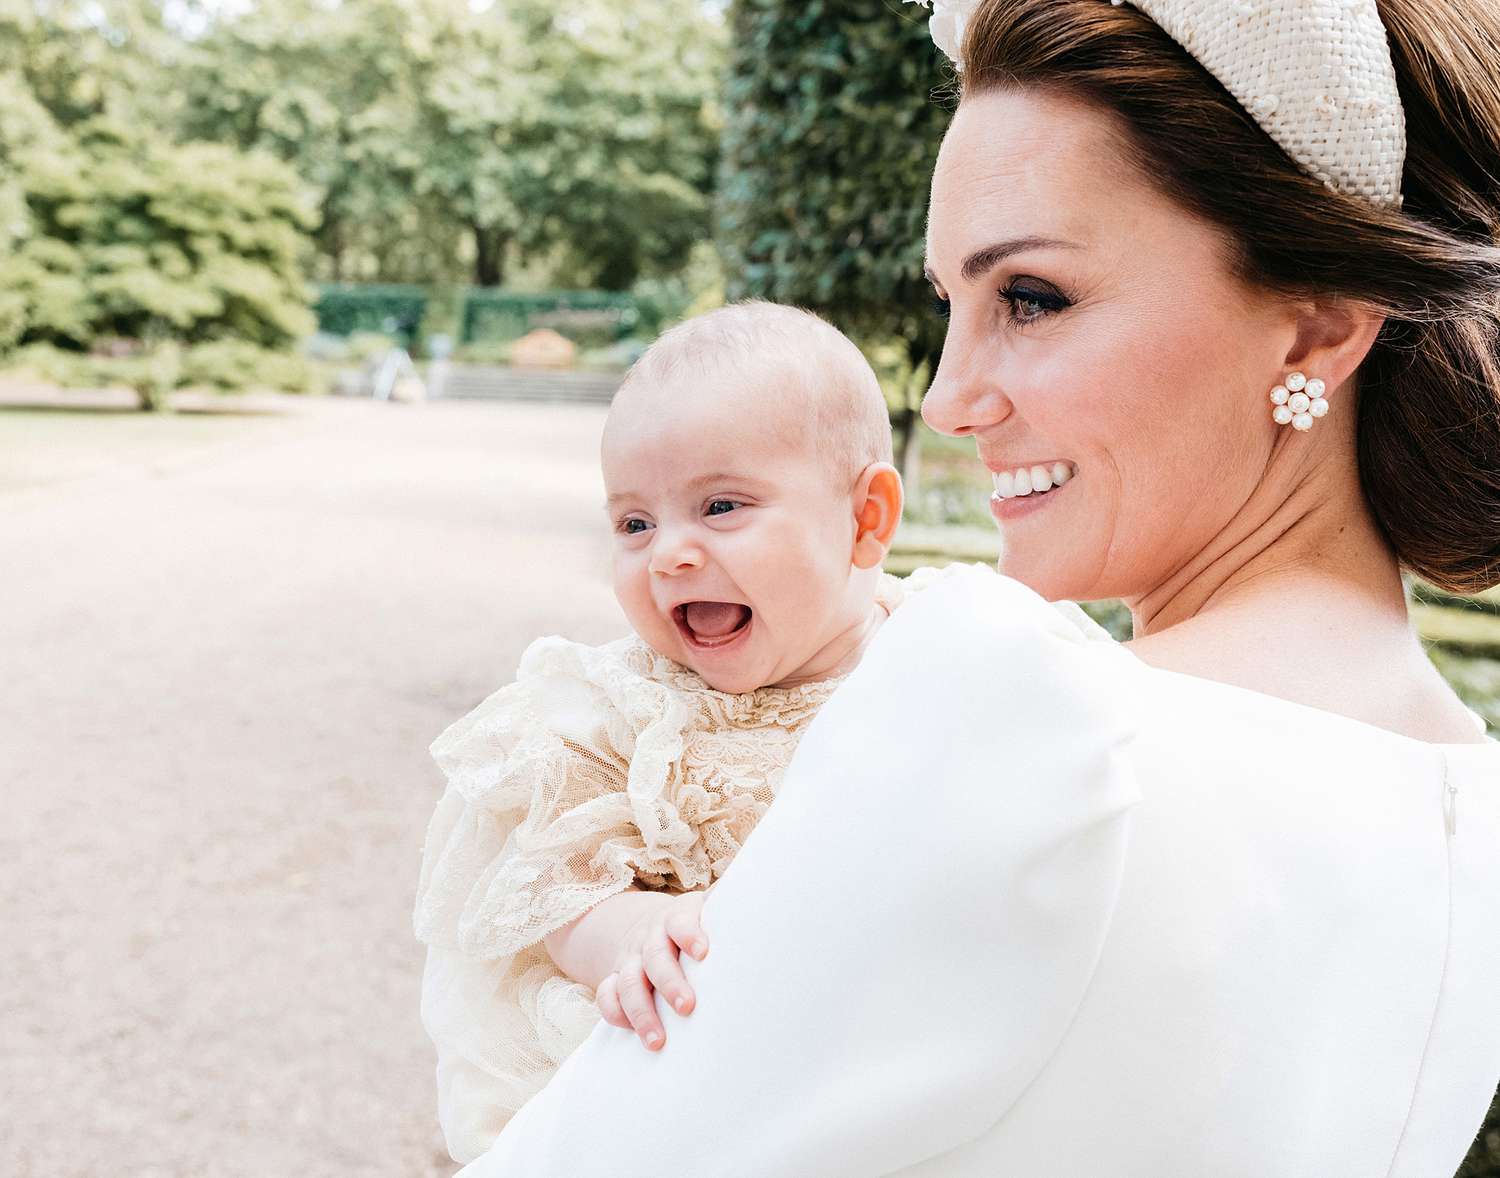 FIRSTS FOR PRINCE LOUIS